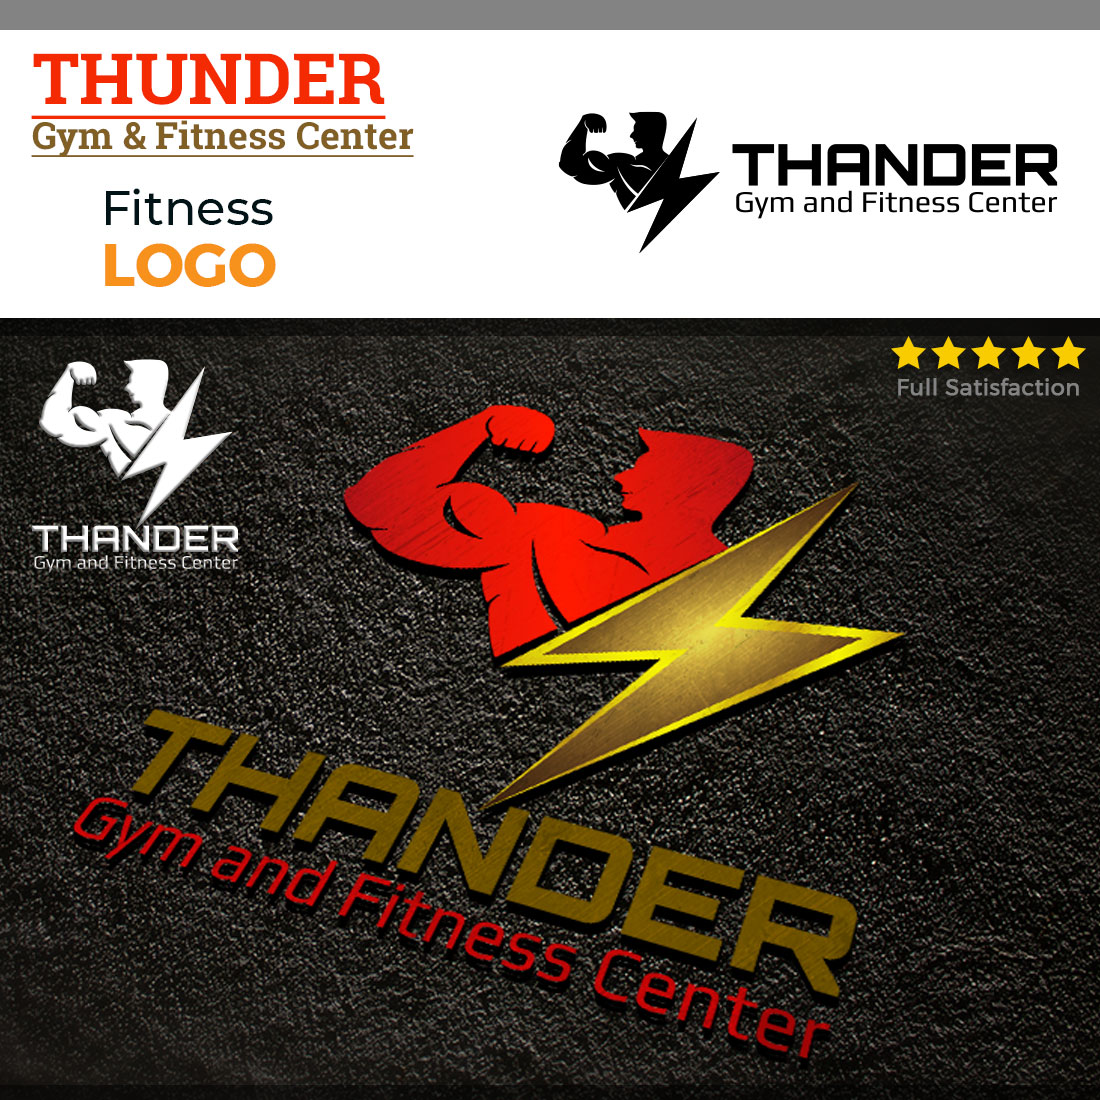 Thunder Gym And Fitness Center Logo - main image preview.